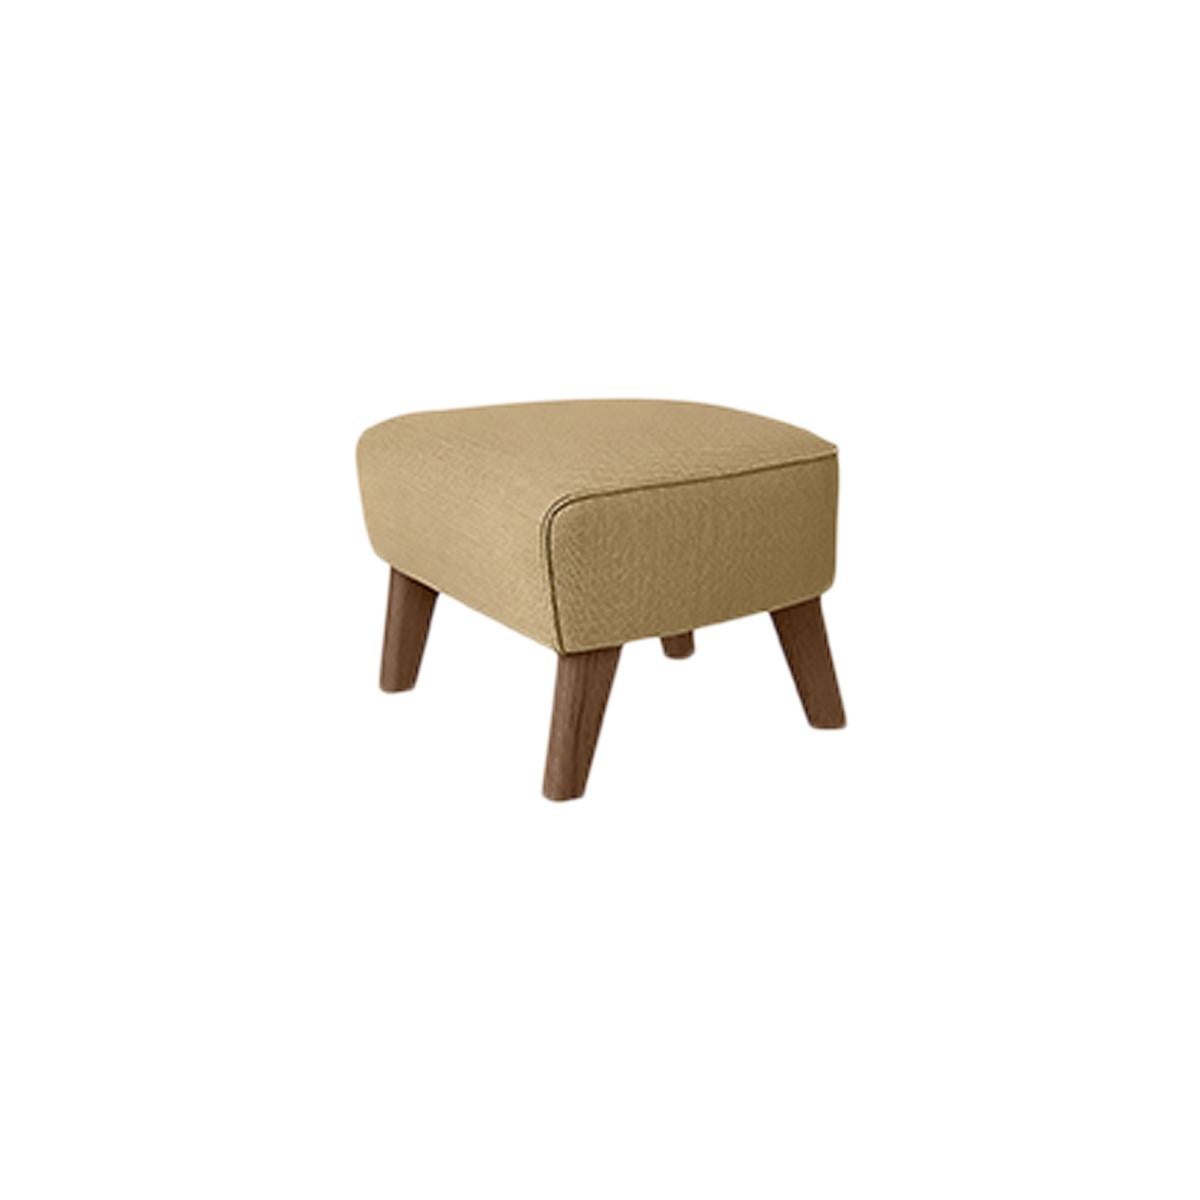 Sand and smoked oak Raf Simons Vidar 3 My Own Chair footstool by Lassen
Dimensions: W 56 x D 58 x H 40 cm 
Materials: Textile
Also available: other colors available.

The My Own Chair Footstool has been designed in the same spirit as Flemming